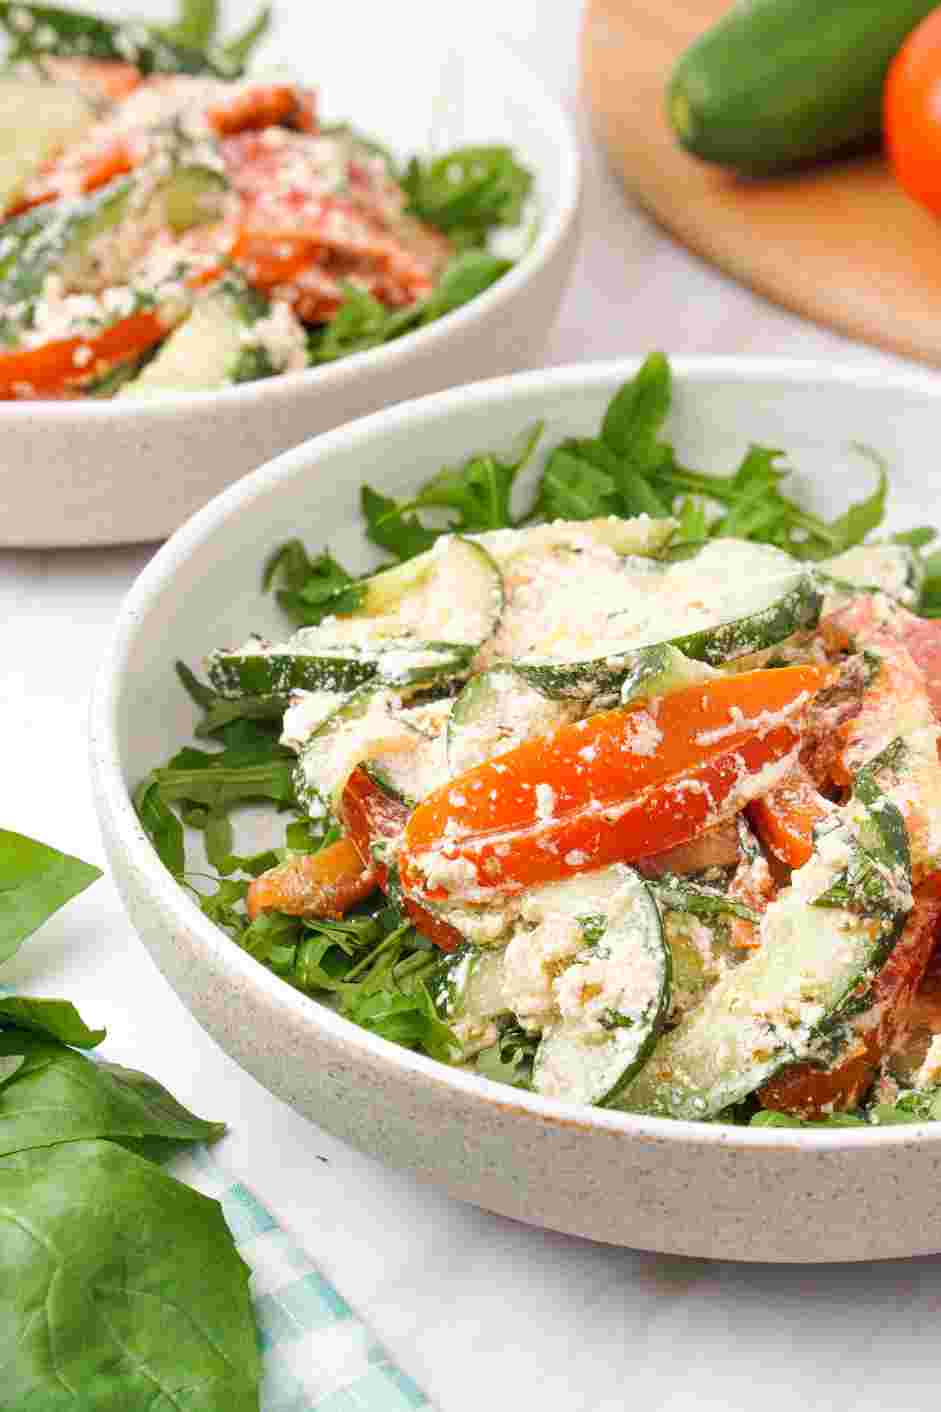 Cucumber Tomato Feta Salad Recipe: Taste and see if you need more oil or vinegar.